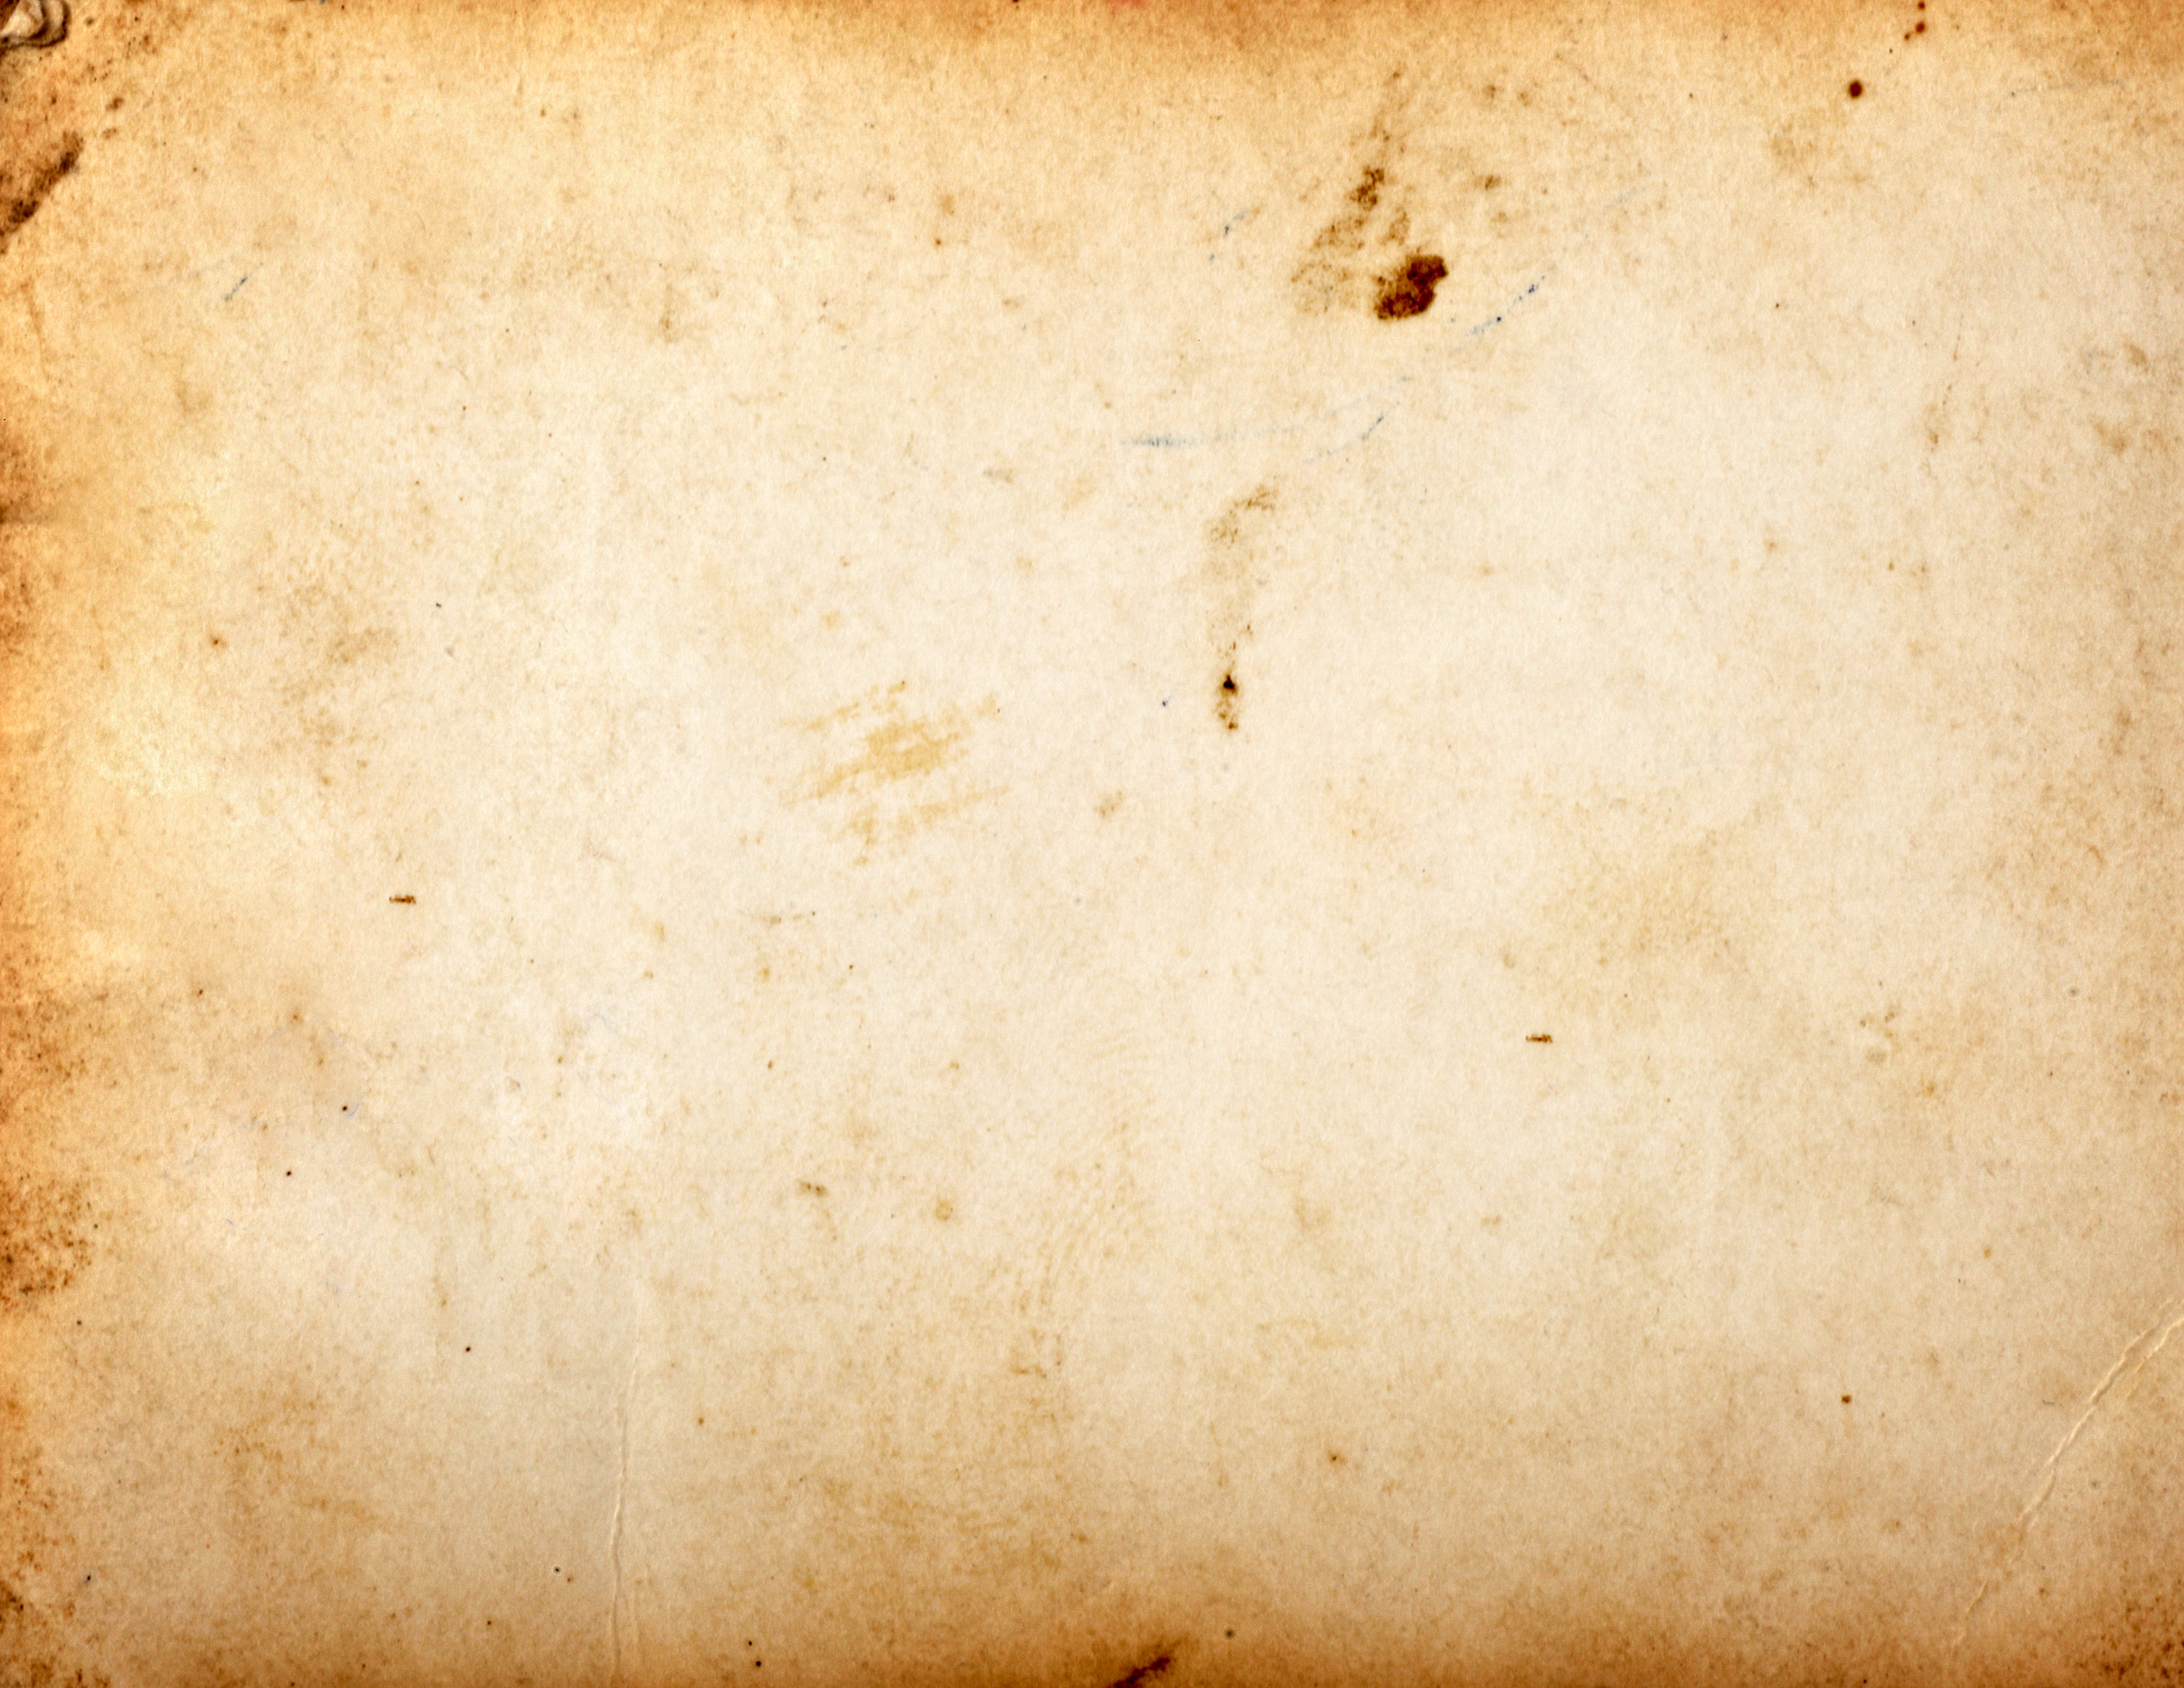 Western Leather Background HD Wallpapers on picsfaircom 3300x2550